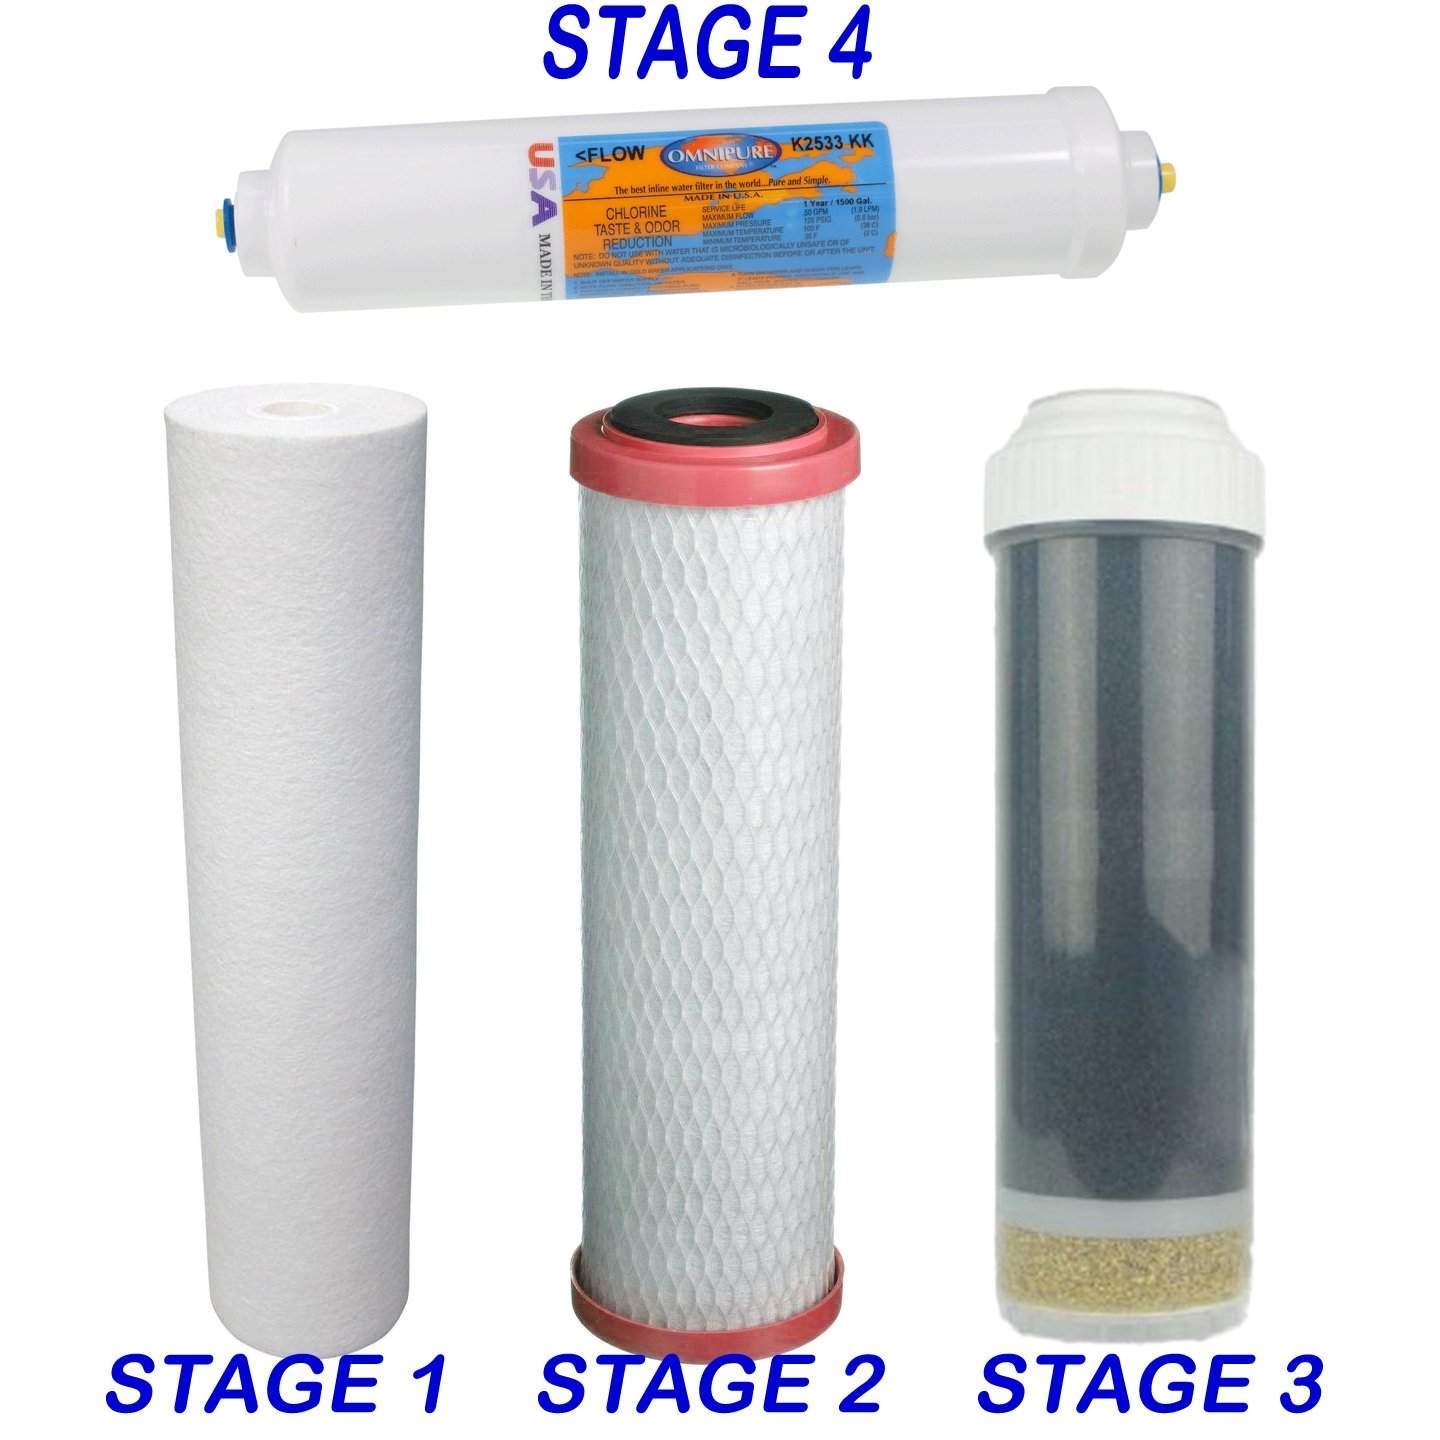 4 Stage Replacement Filter Set - Flouride Reduction-waterglory-10",2500 gallons,AMMONIA,ARSENIC,CADMIUM,CHLORAMINE,CHLORINE | BAD TASTES & ODORS,CHROMIUM,FLUORIDE,HEAVY METALS,INSECTICIDES AND HERBICIDES,Replacement Filters,SEDIMENT | DIRT | RUST | SAND | SILT,THM’S,VOC’S